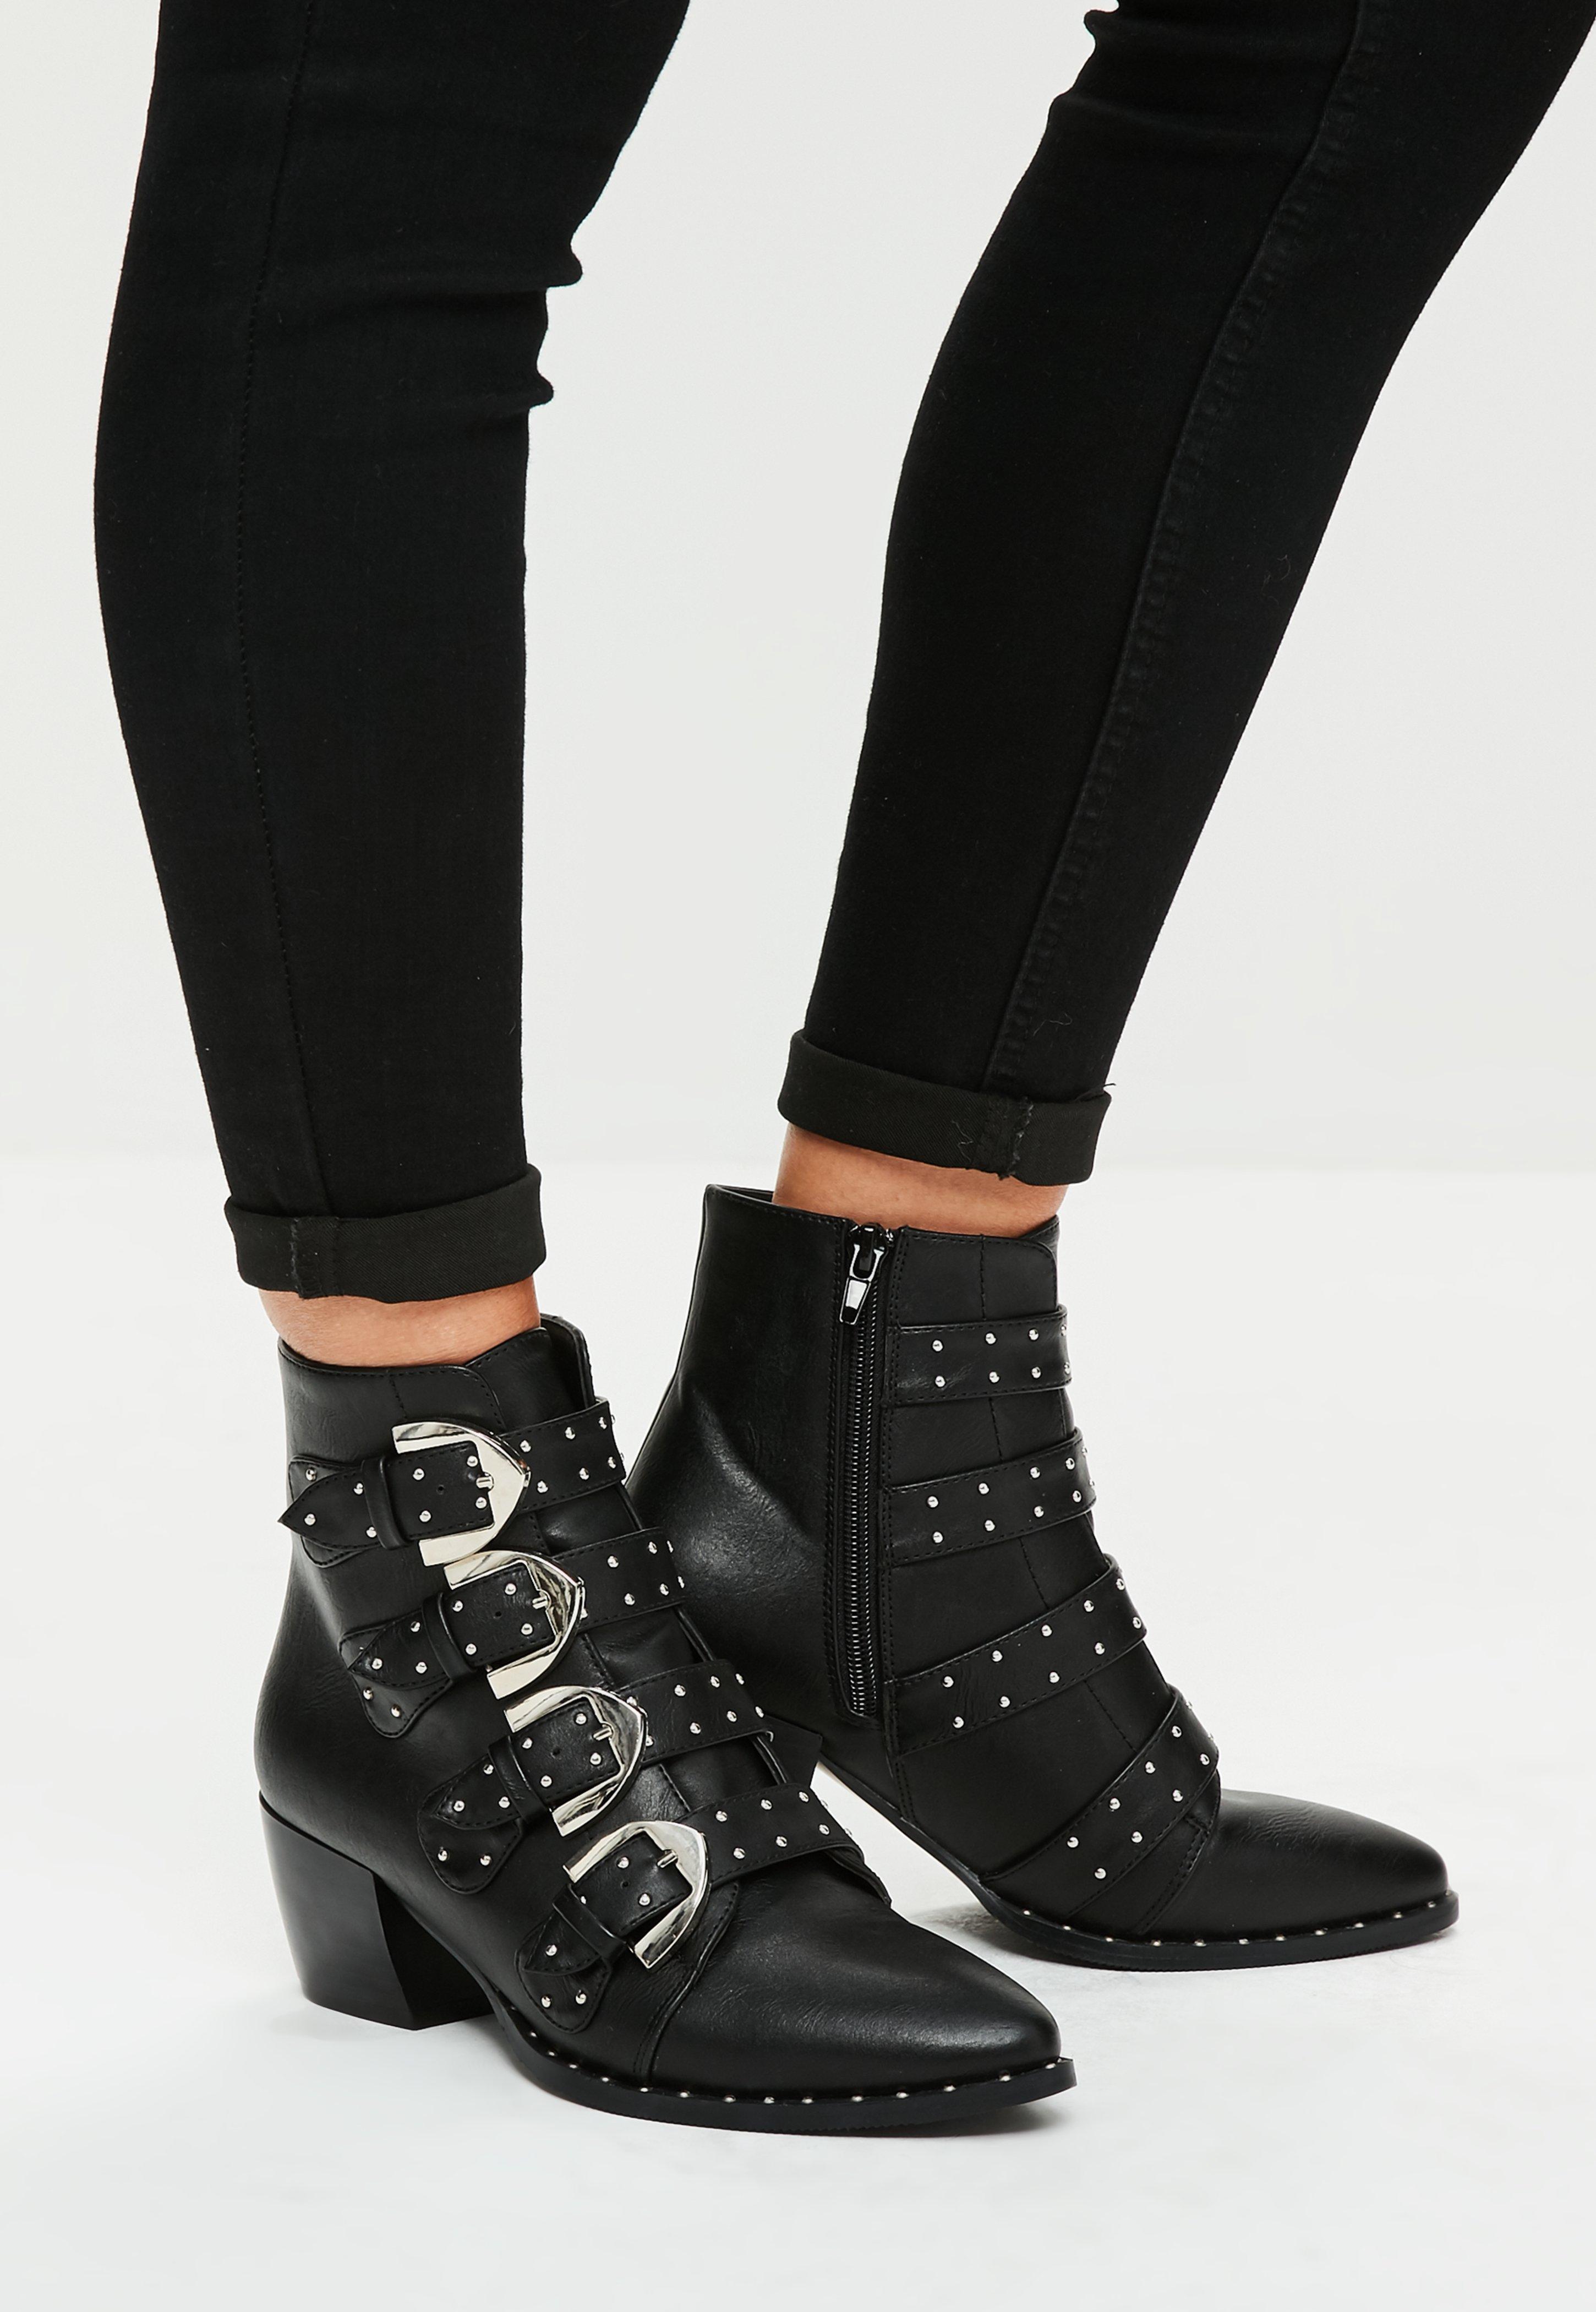 Missguided Black Four Buckle Ankle Boots - Lyst